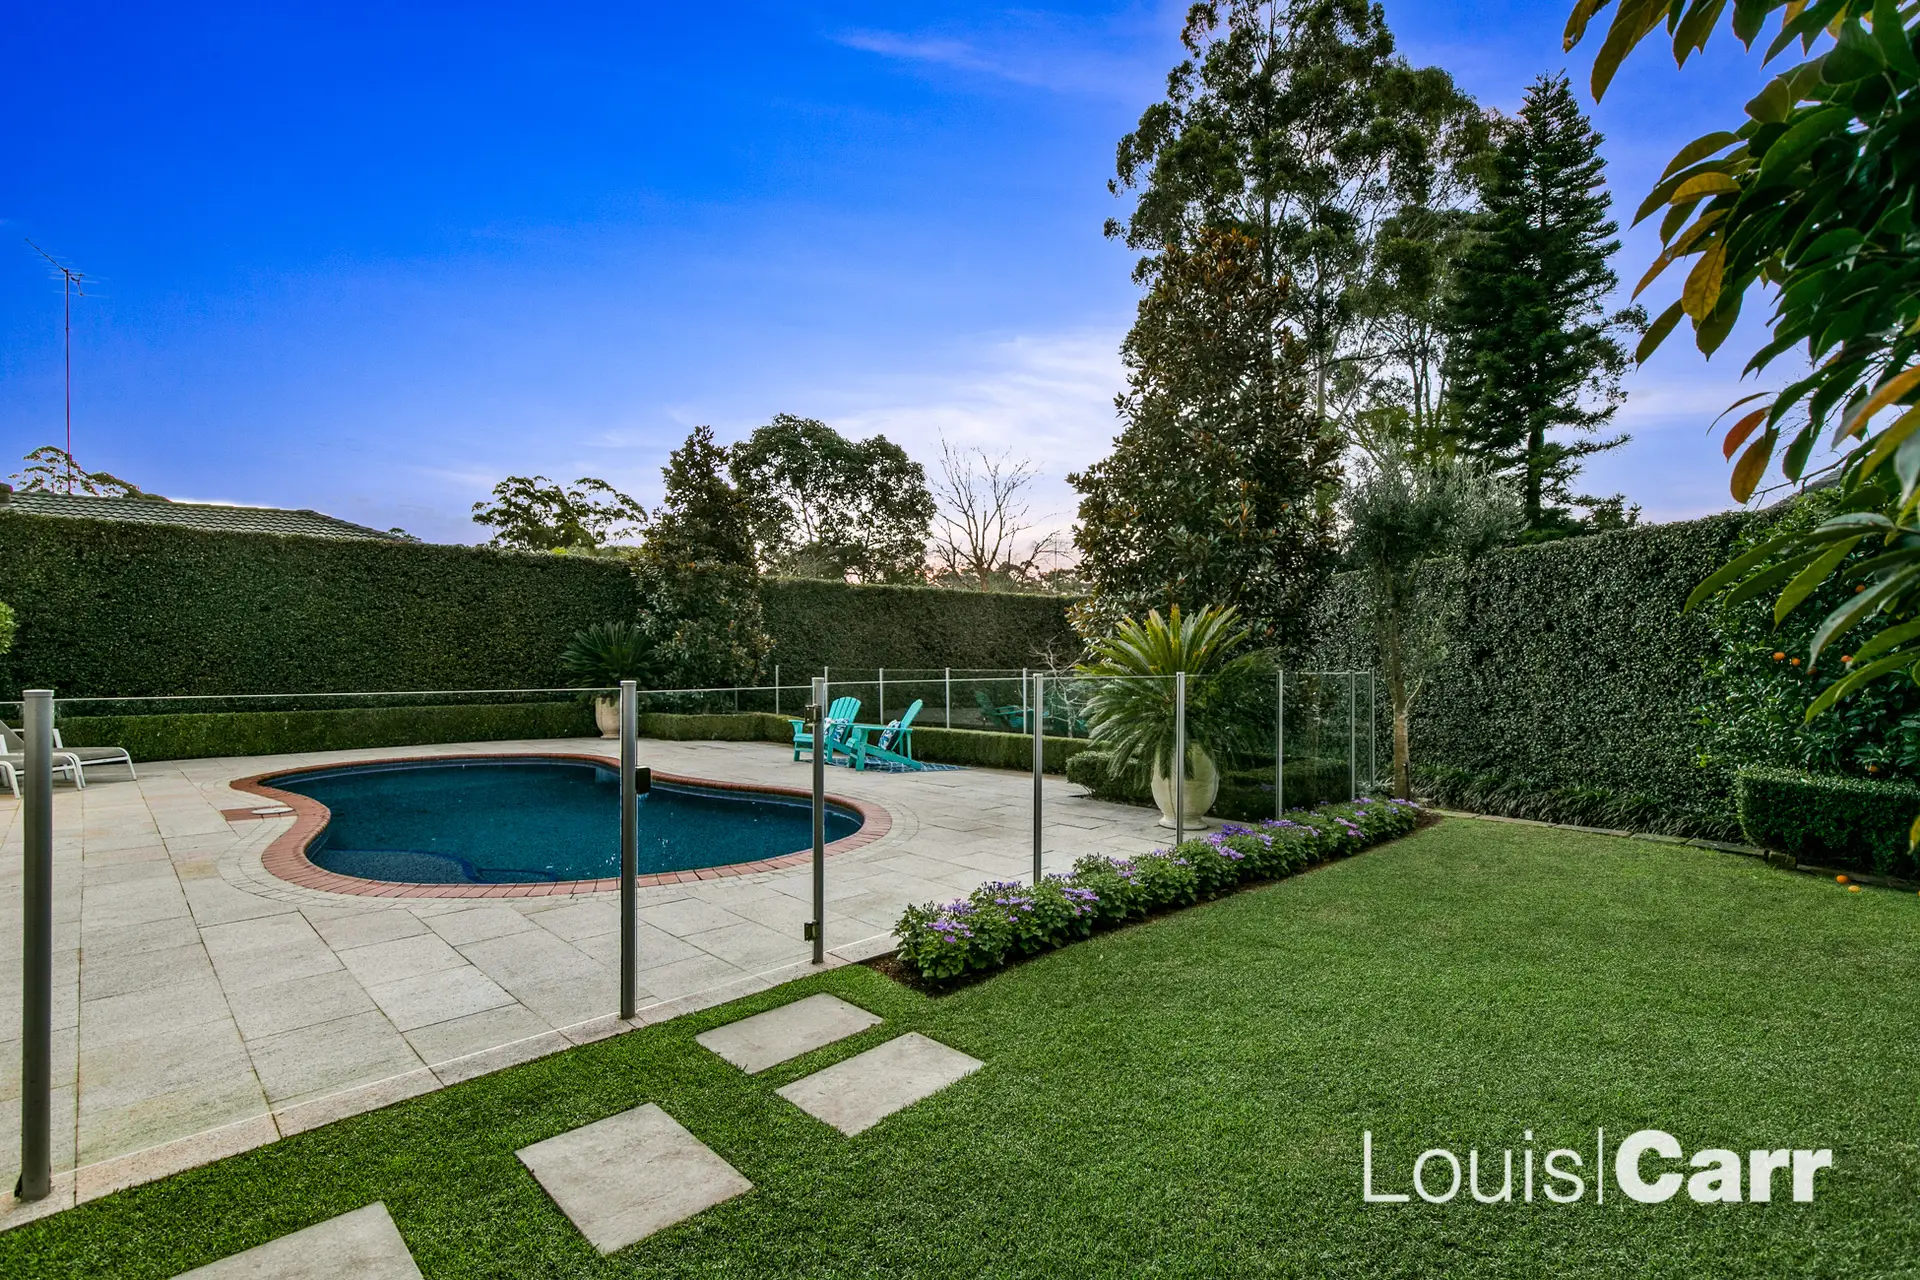 Photo #12: 16 Bellbird Drive, West Pennant Hills - Sold by Louis Carr Real Estate